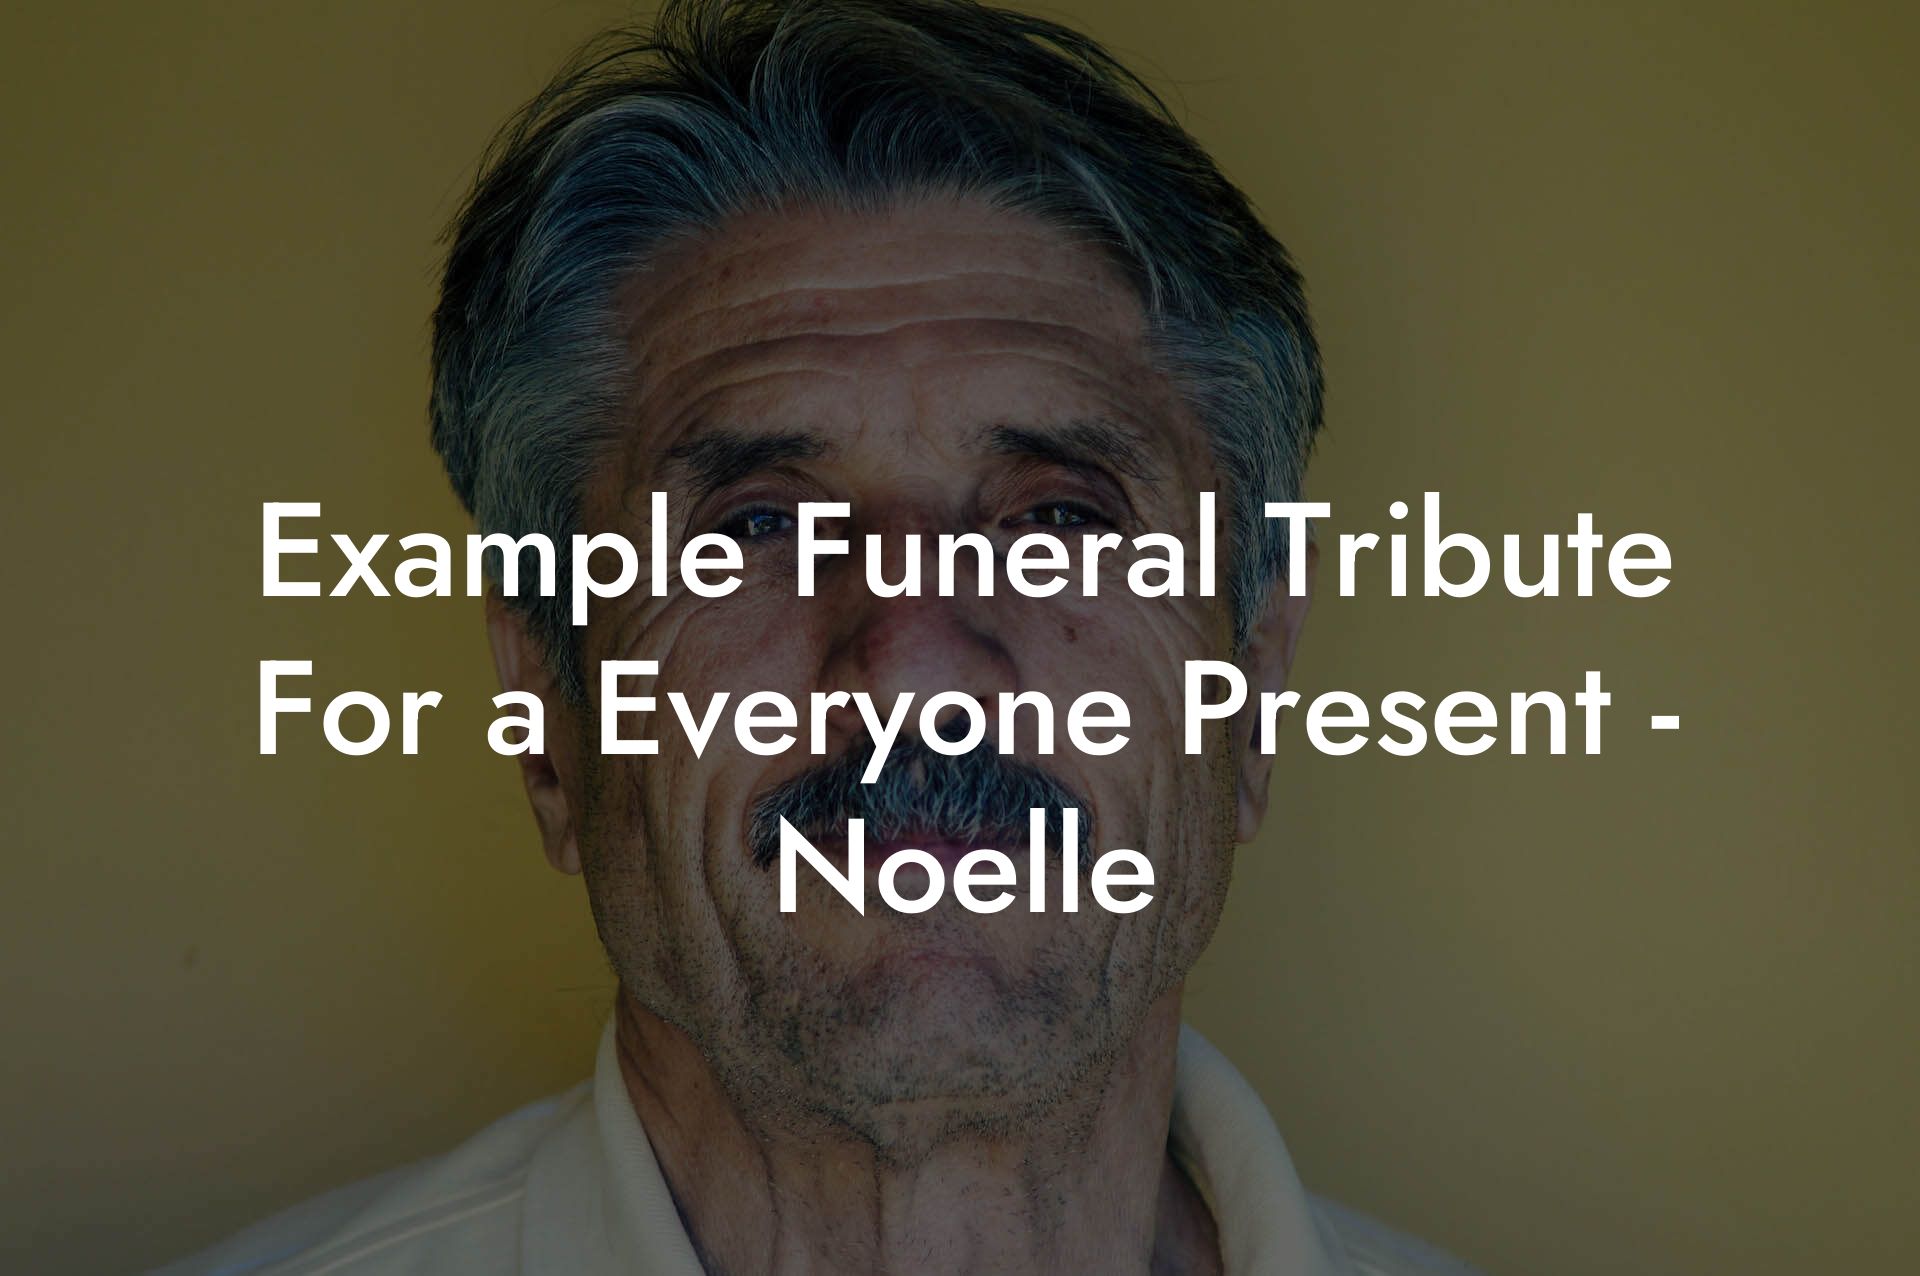 Example Funeral Tribute For a Everyone Present - Noelle